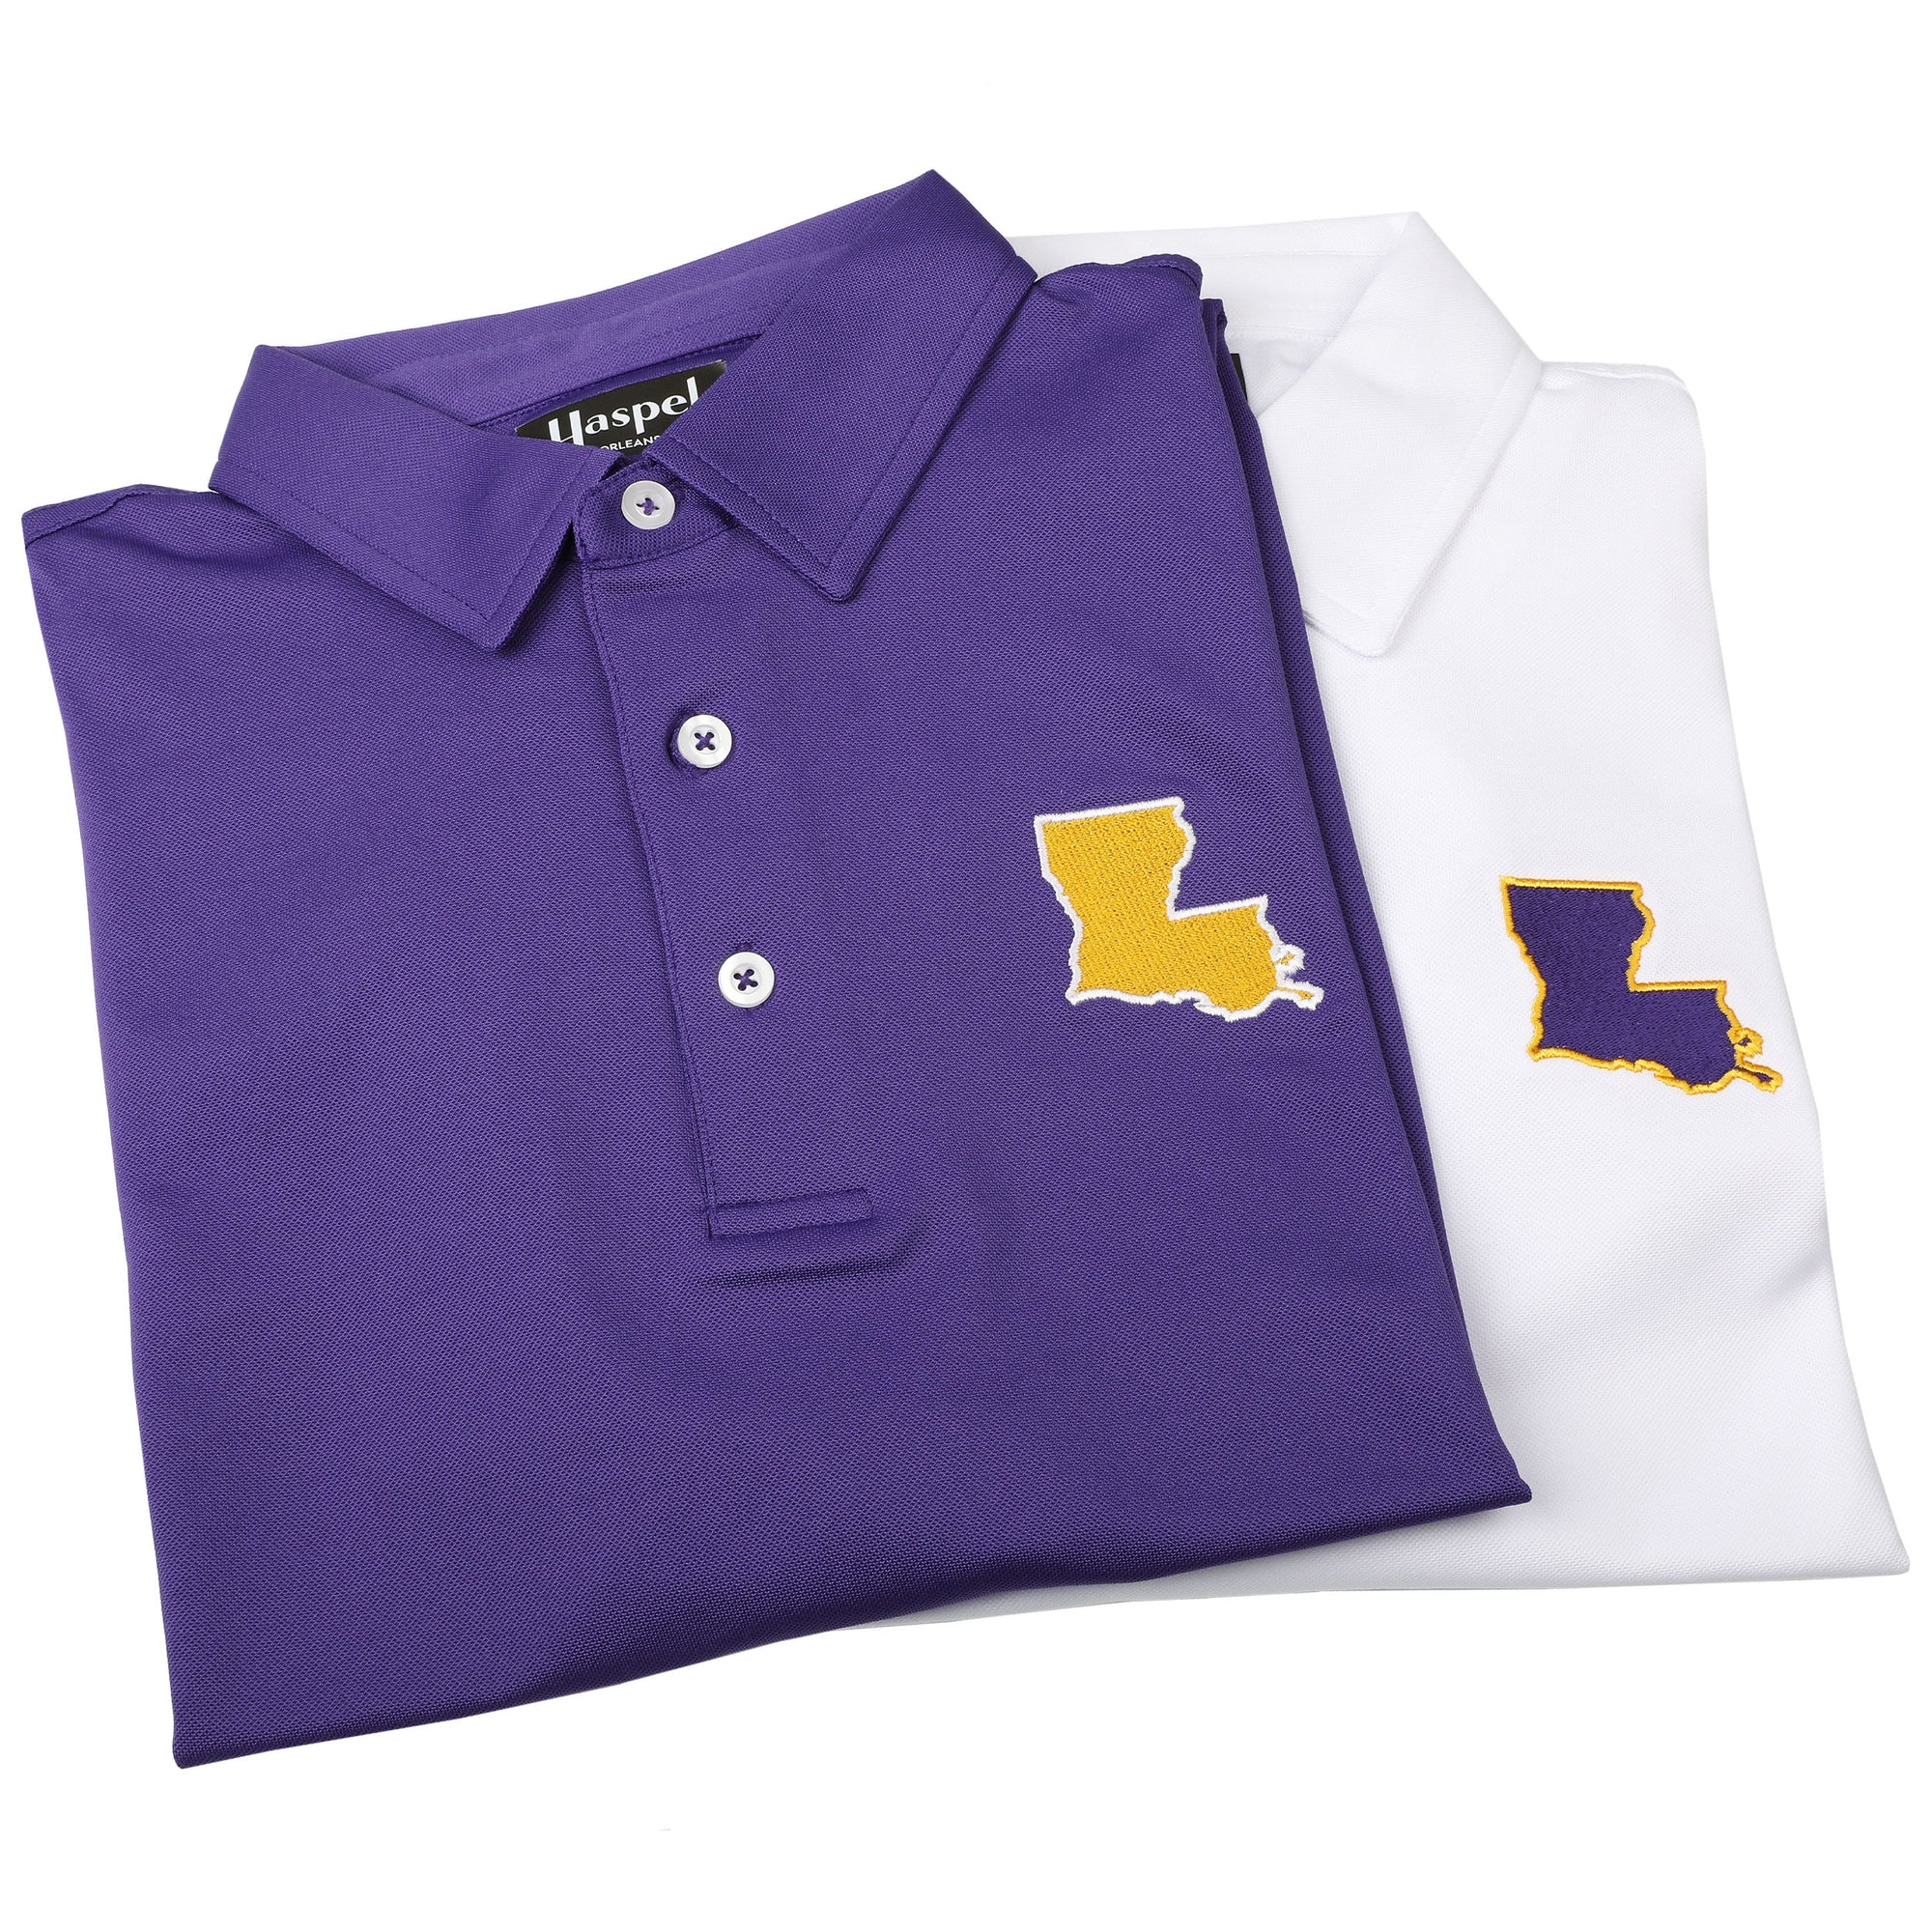 Purple, gold and a regal roar. and you are ready for Game Day! A classic style, a bold color, ready for a true Louisiana Saturday Night down in Baton Rouge.  95% Cotton / 5% Spandex • 3 Button Placket • No Chest Pocket • Imported • Machine Wash • Return Policy